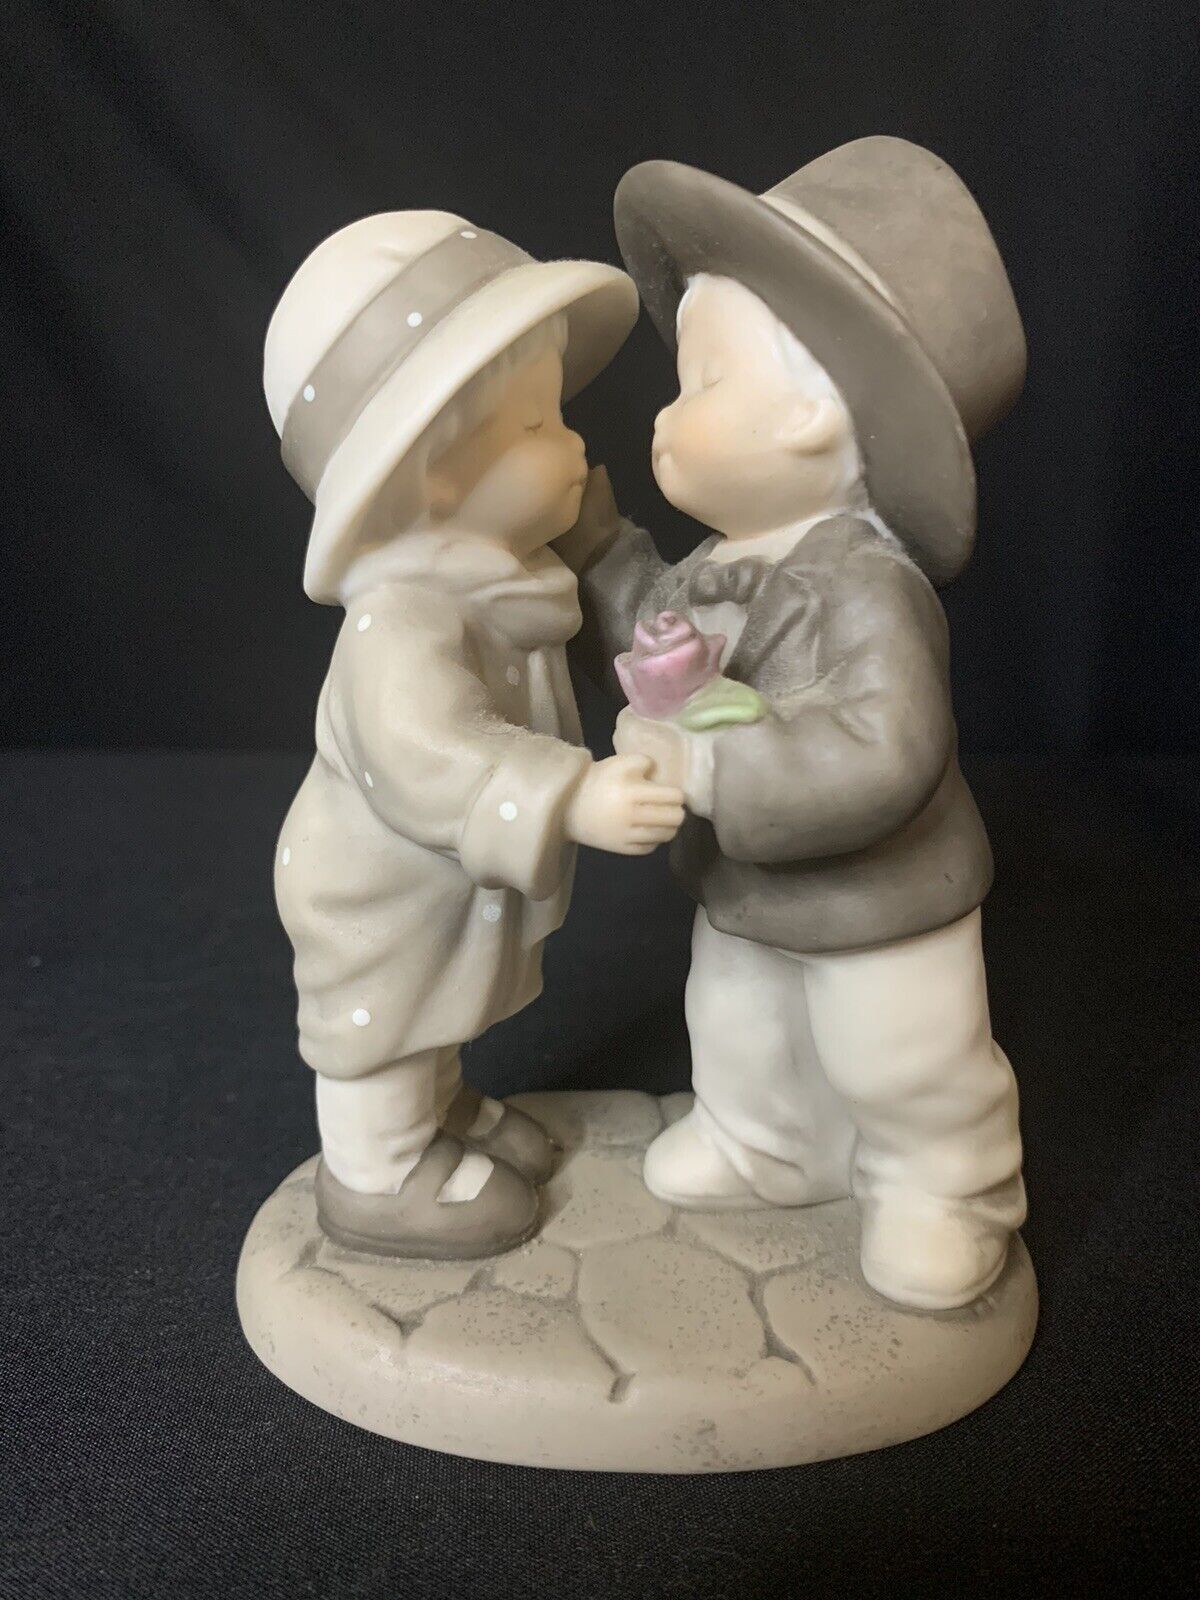 Enesco Figurine “A Rose for a Kiss, How can I Miss” VTG 1995 #175307